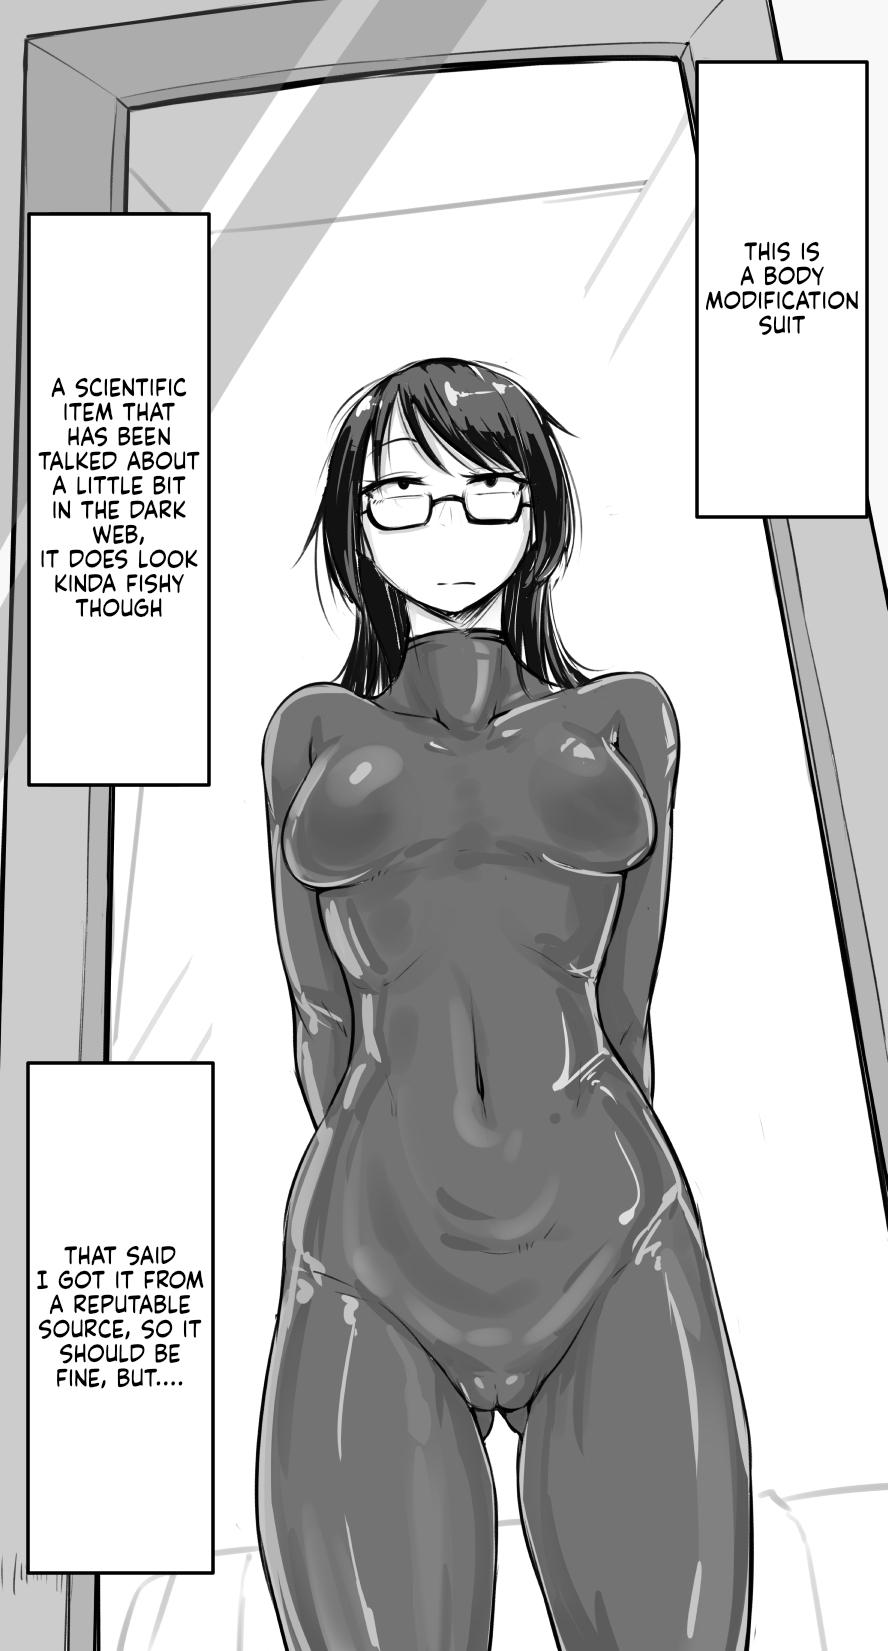 A Geek girl getting the ideal body 3